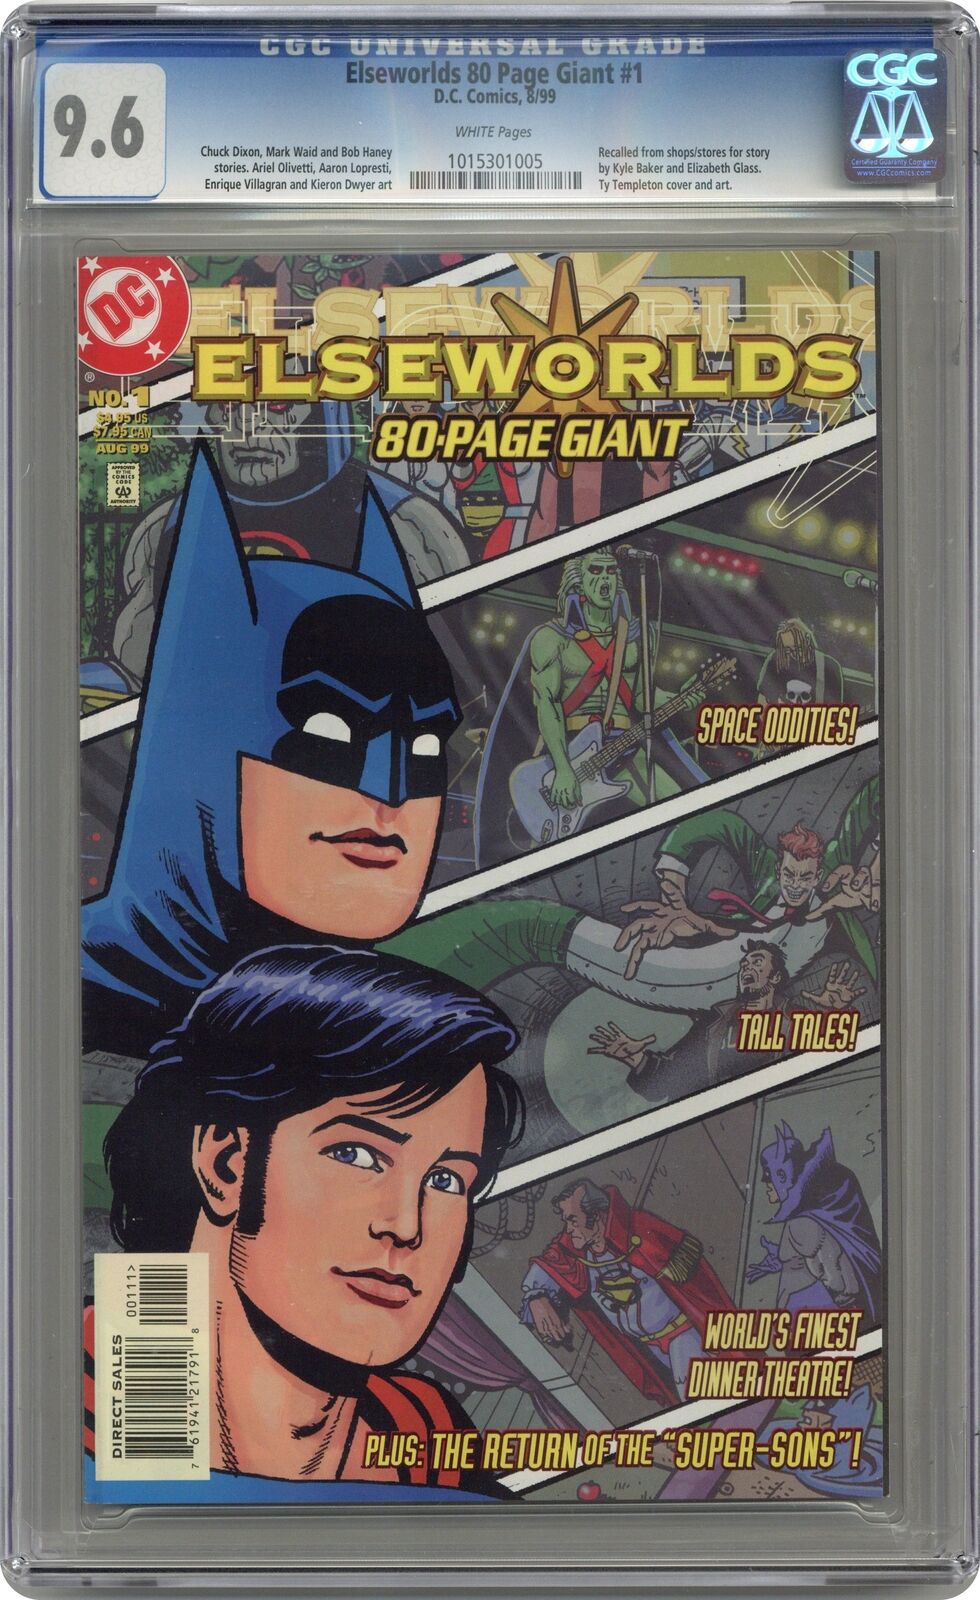 Elseworlds 80-Page Giant #1 CGC 9.6 1999 1015301005